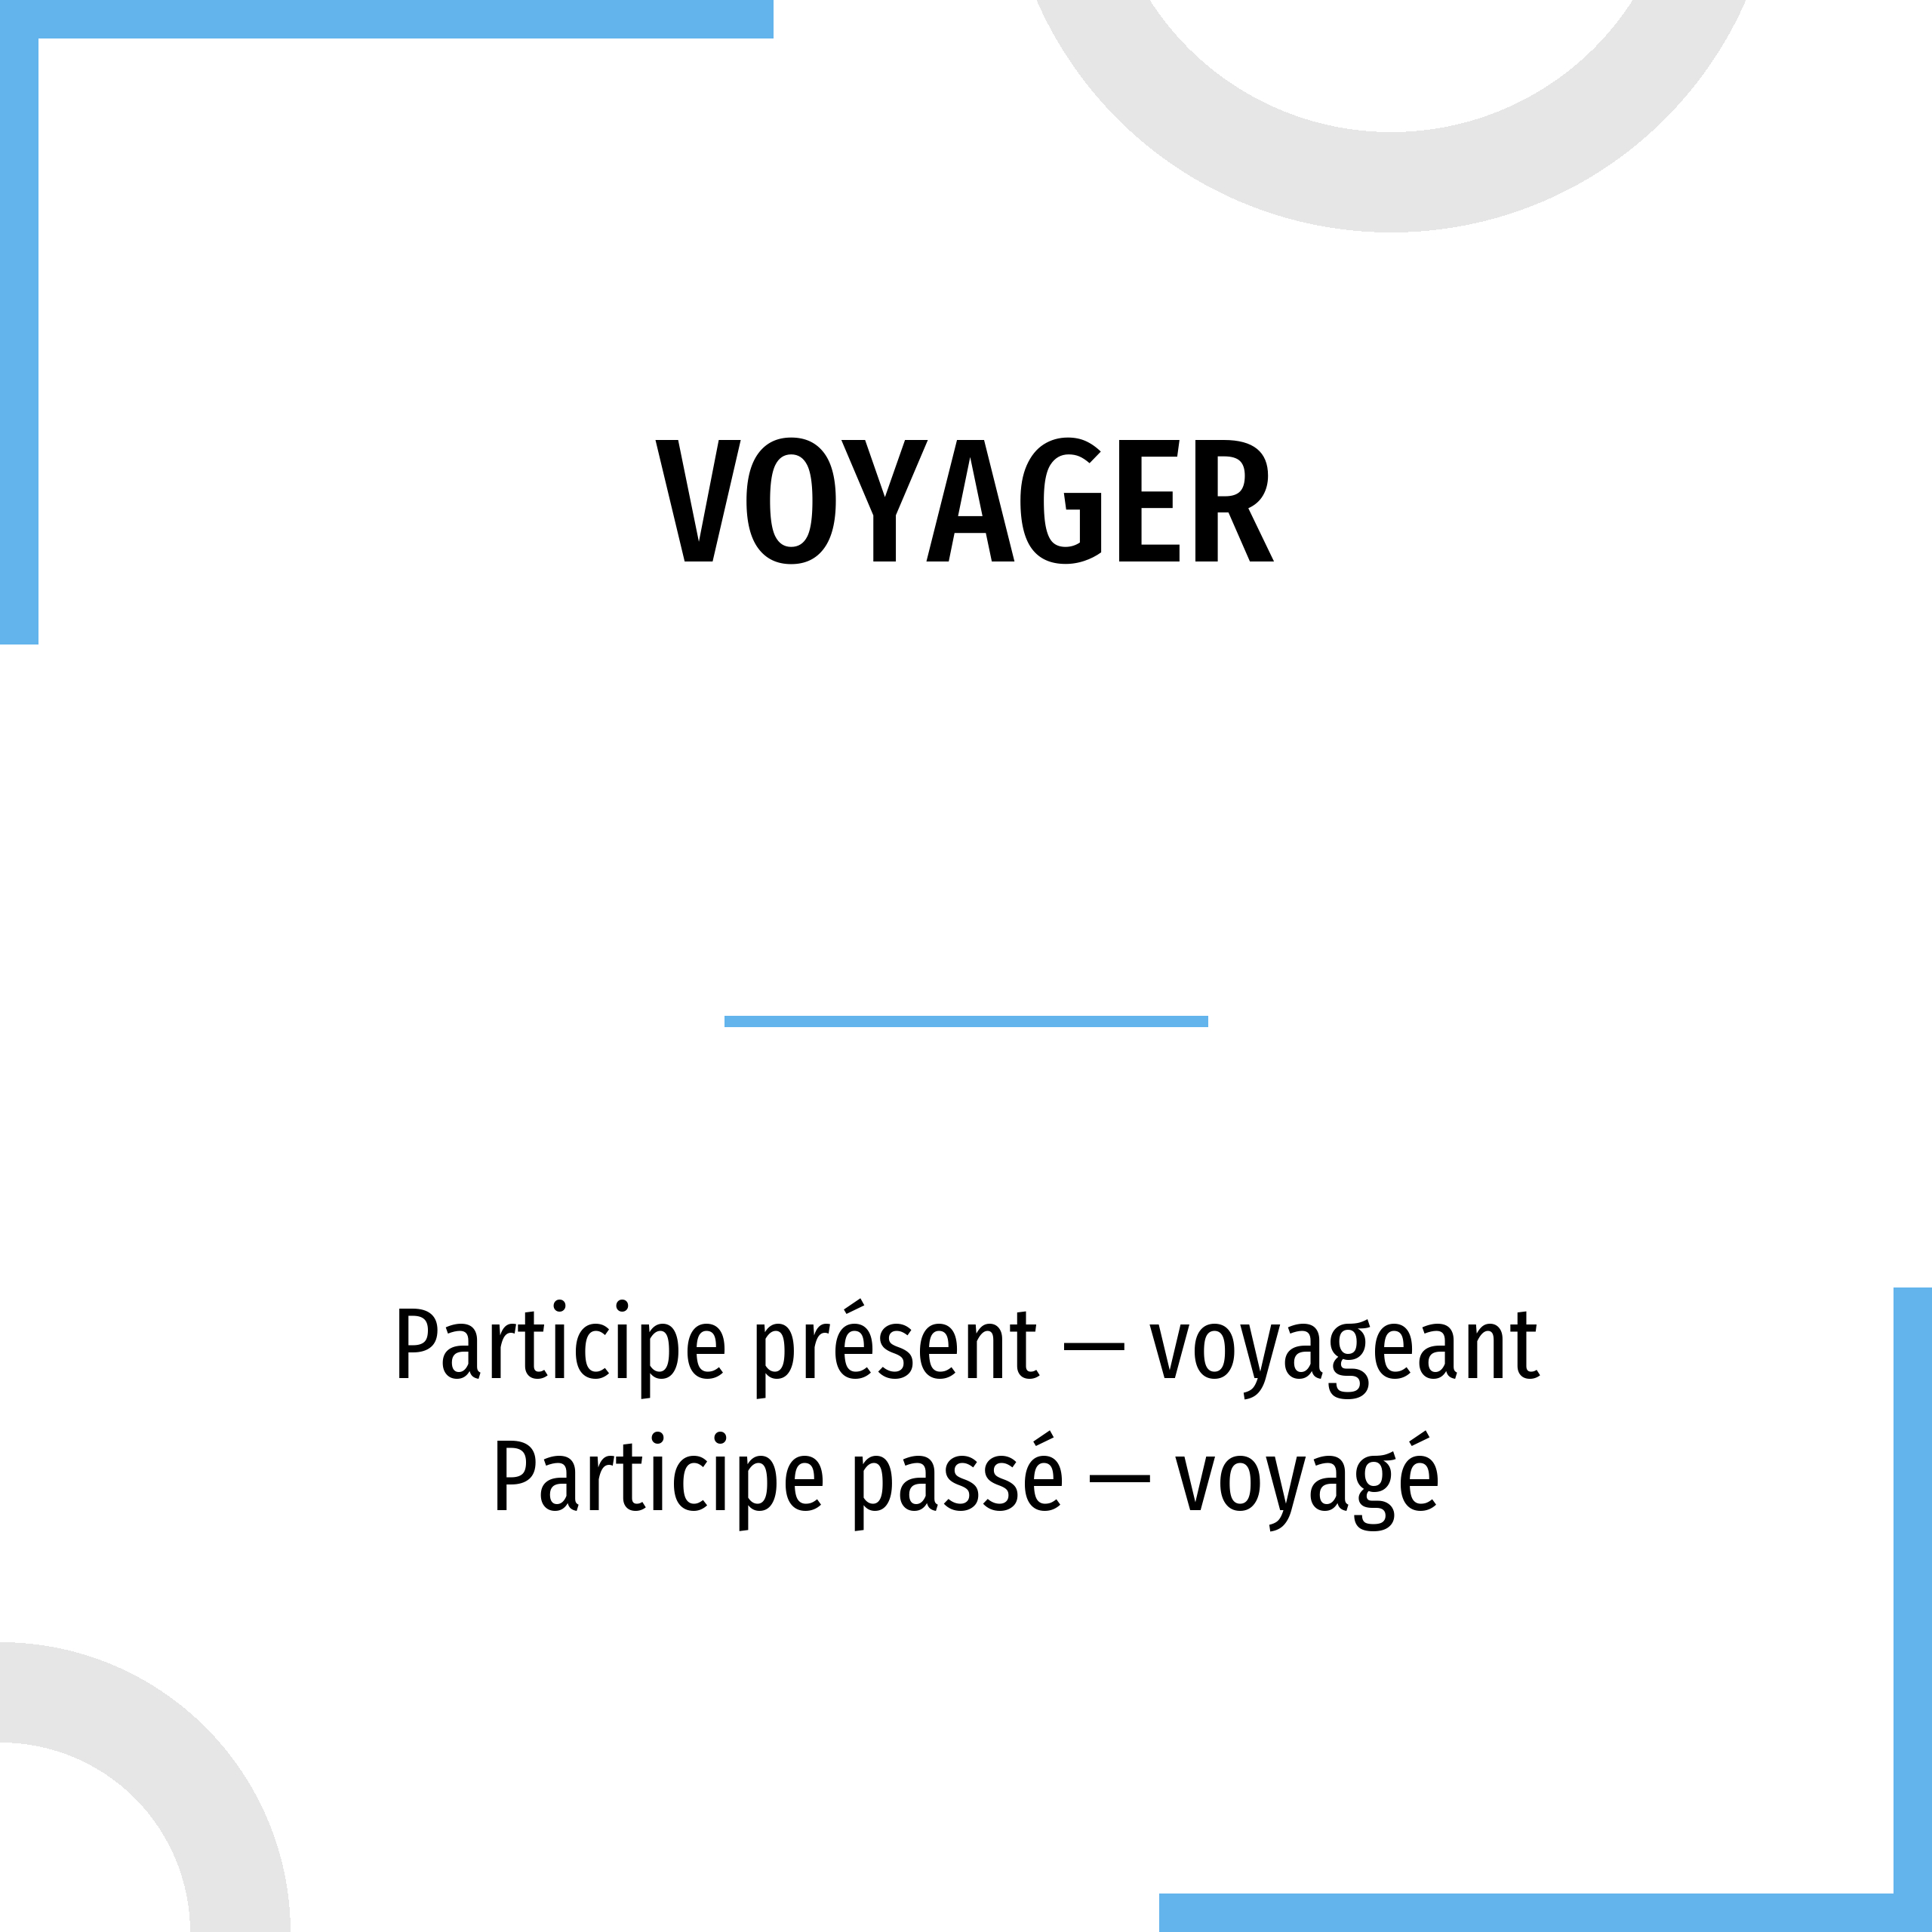 synonyms for voyager in french